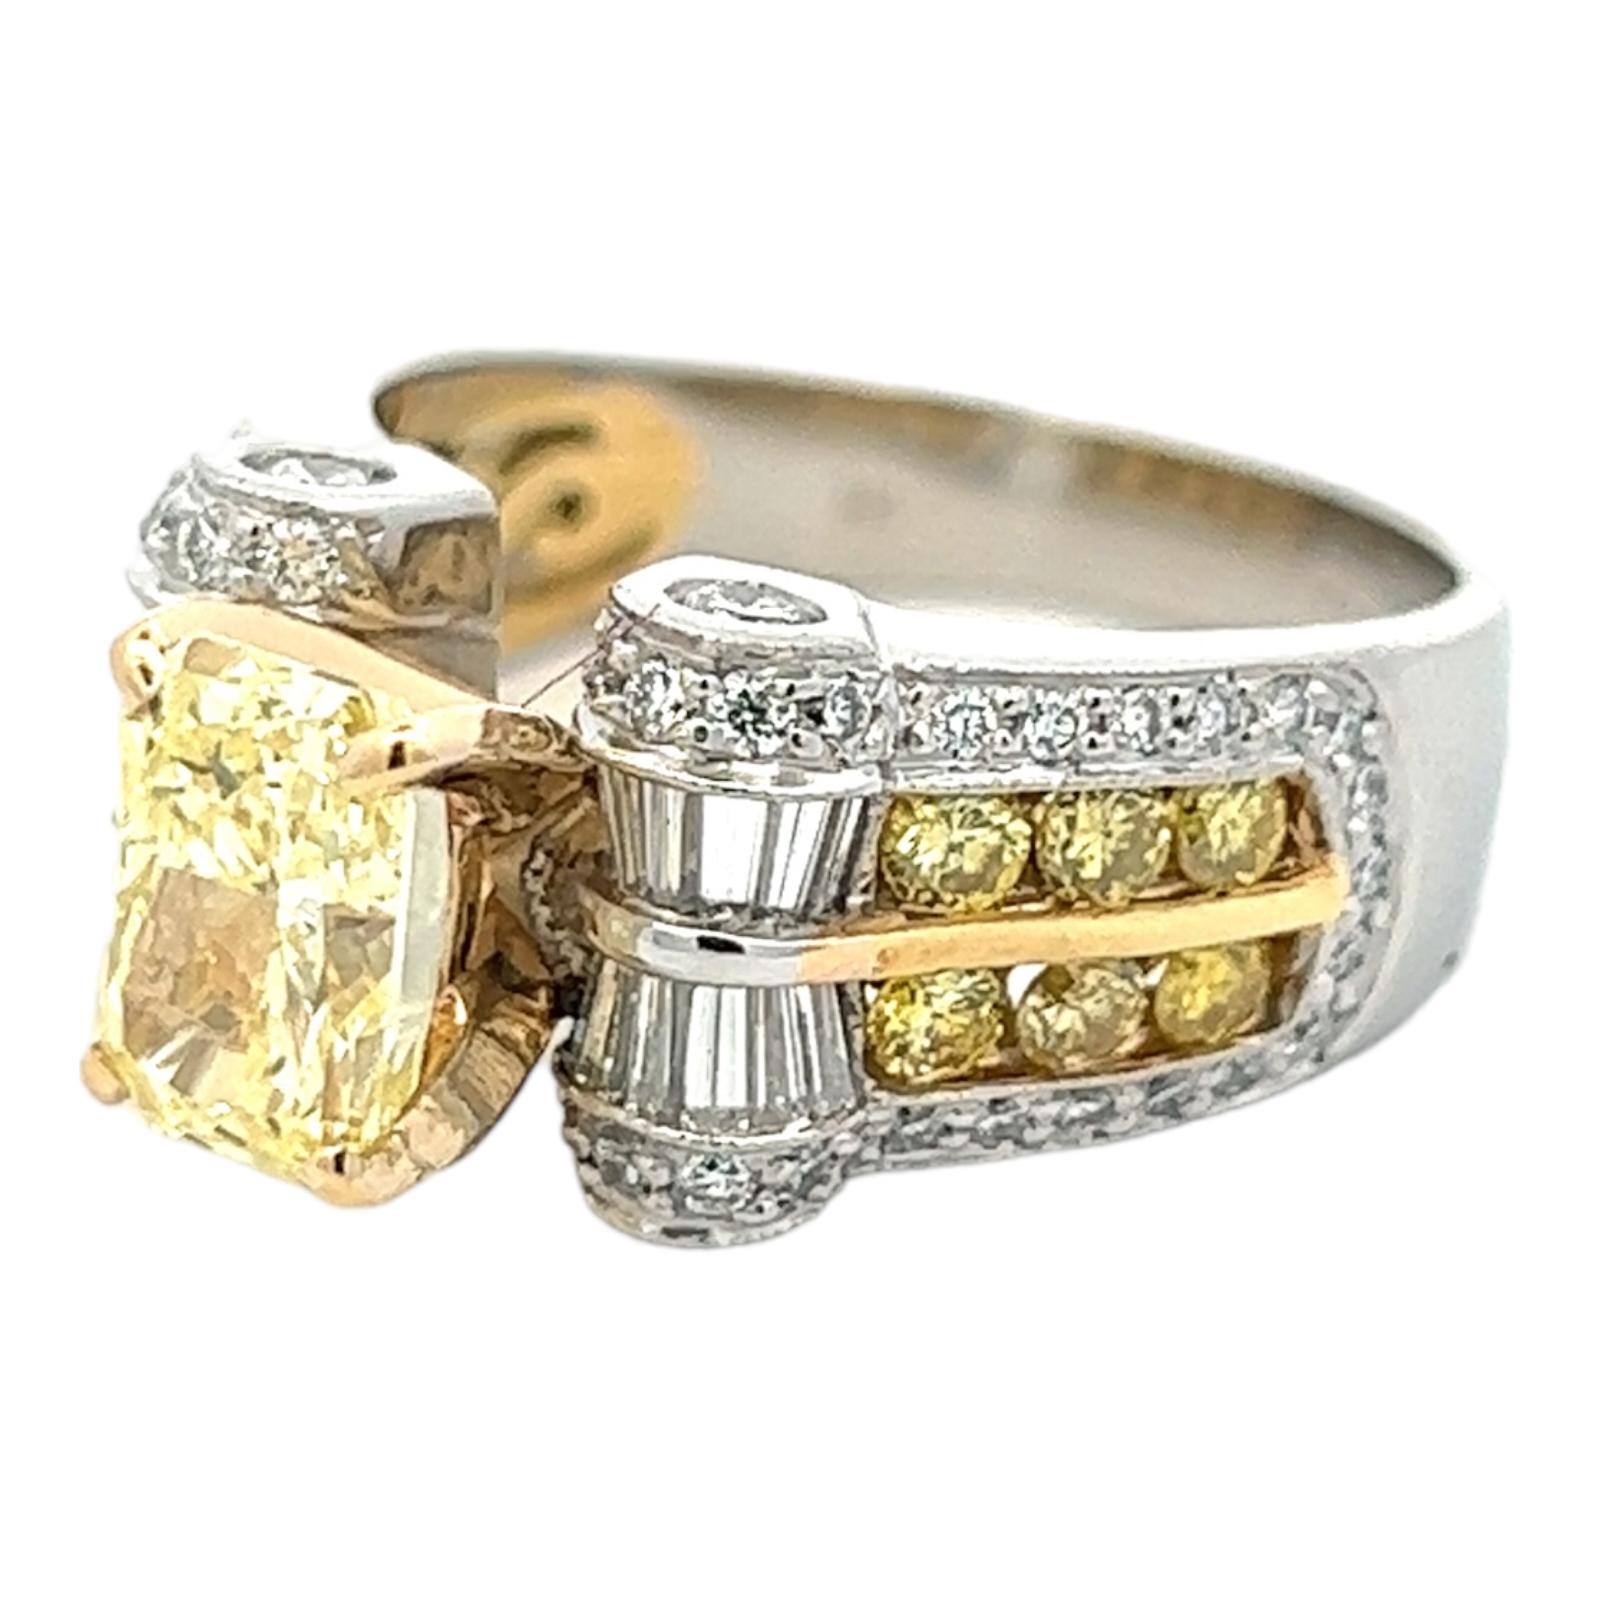 Radiant Cut Fancy Yellow Radiant Diamond 18KG PLT Engagment Ring Jewels by Star GIA FY/VVS2 